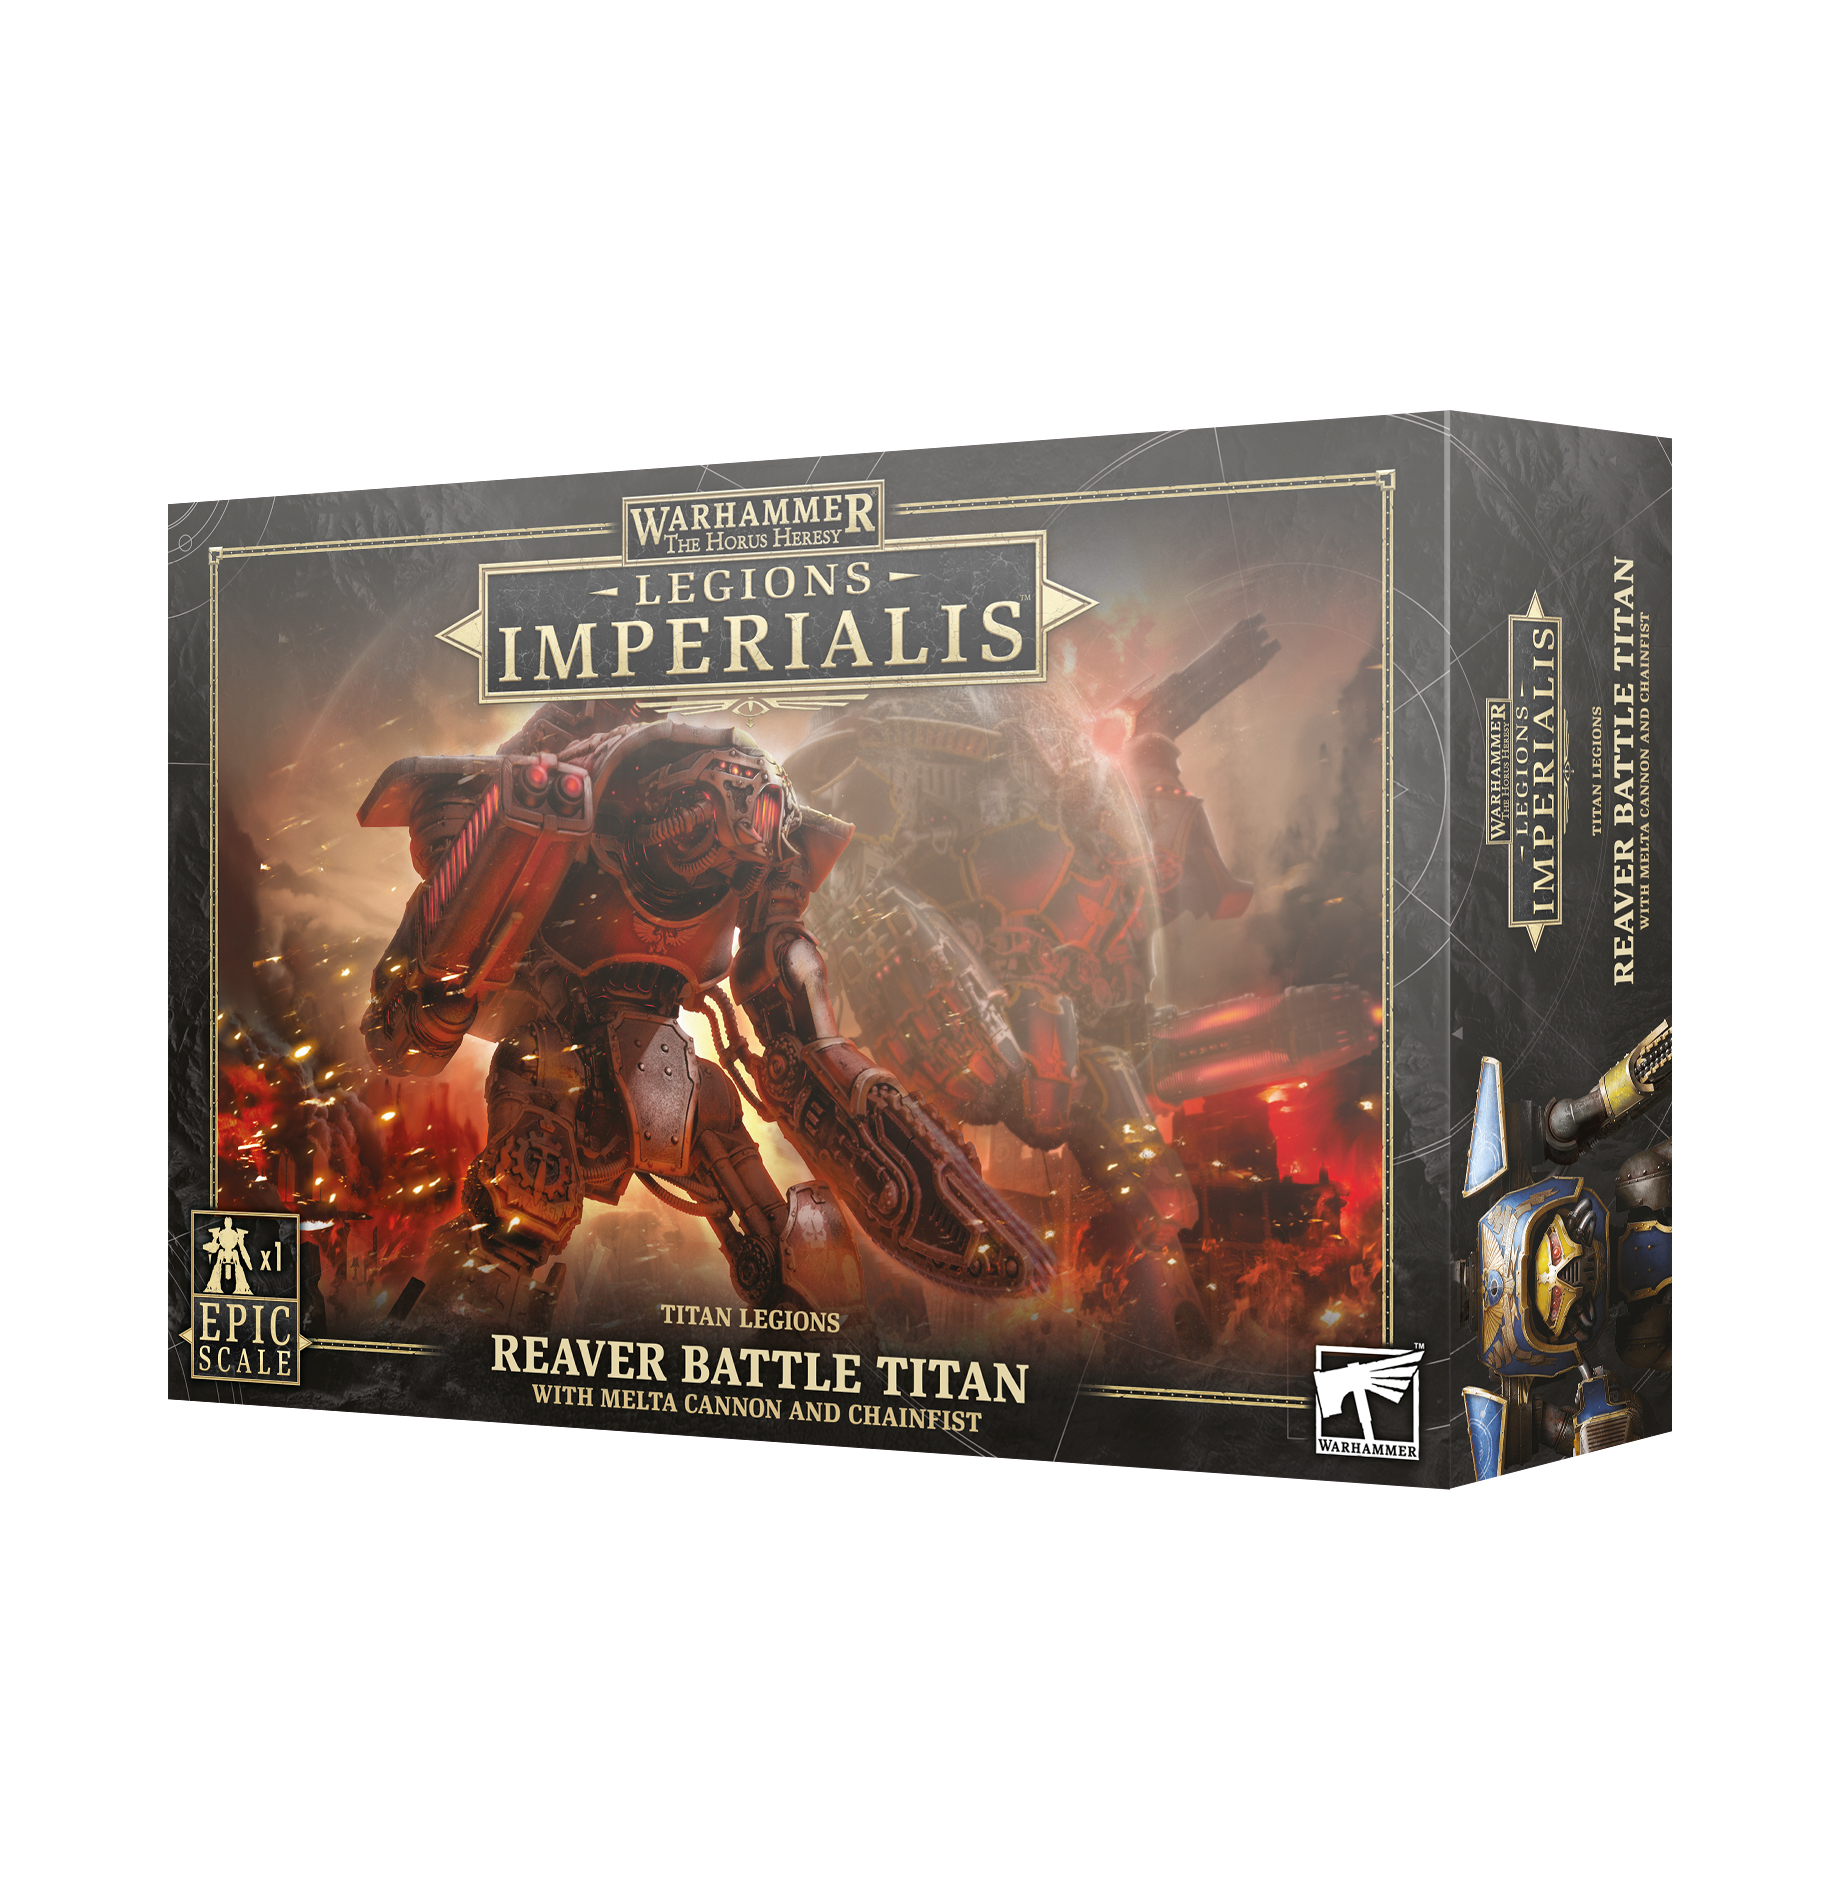 Warhammer: The Horus Heresy: Legions Imperialis: Reaver Titan with Melta Cannon and Chainfist 